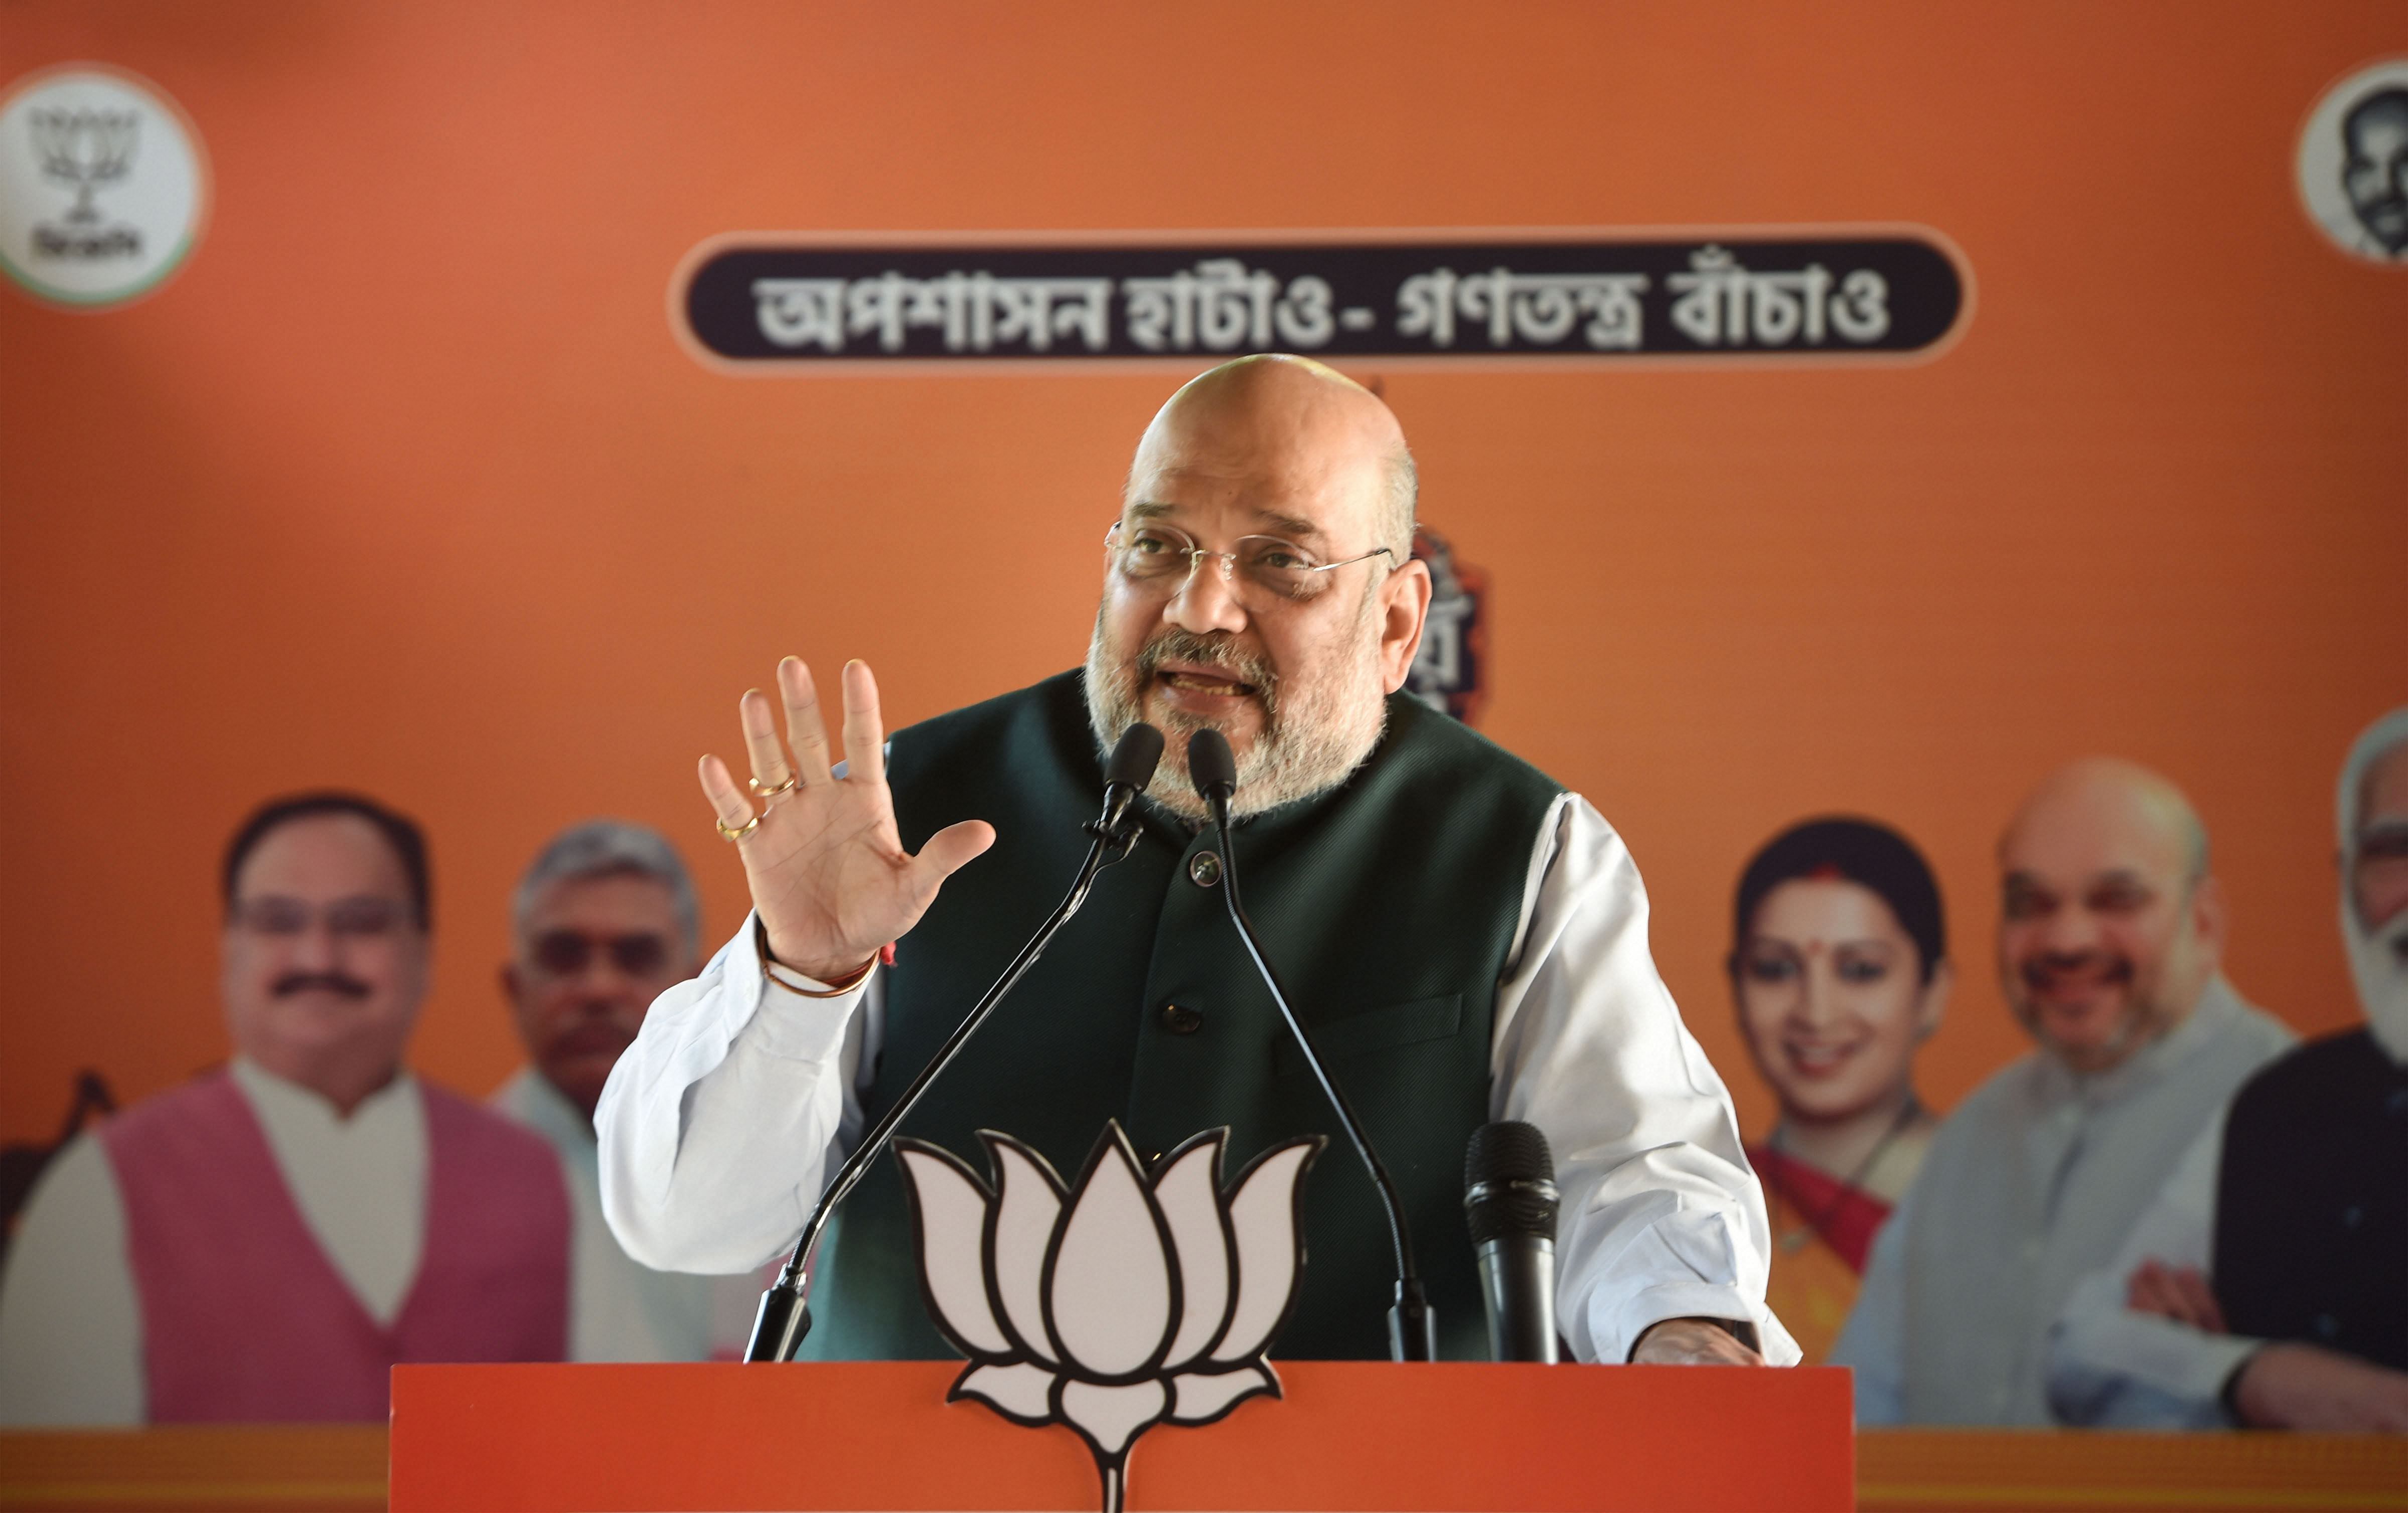  Union Home Minister Amit Shah. Credit: PTI Photo